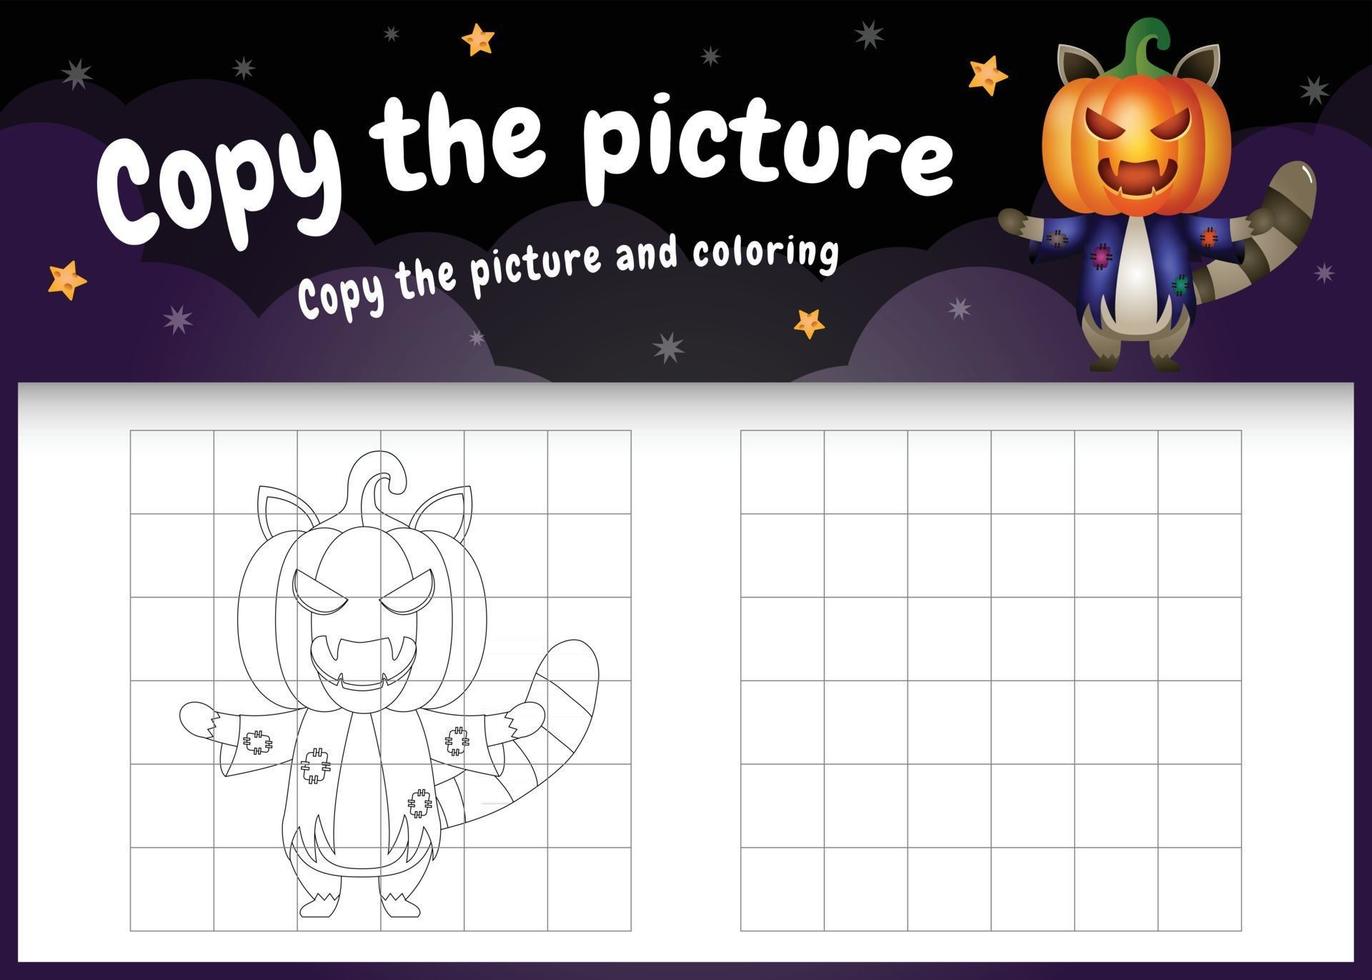 copy the picture kids game and coloring page with a cute raccoon vector